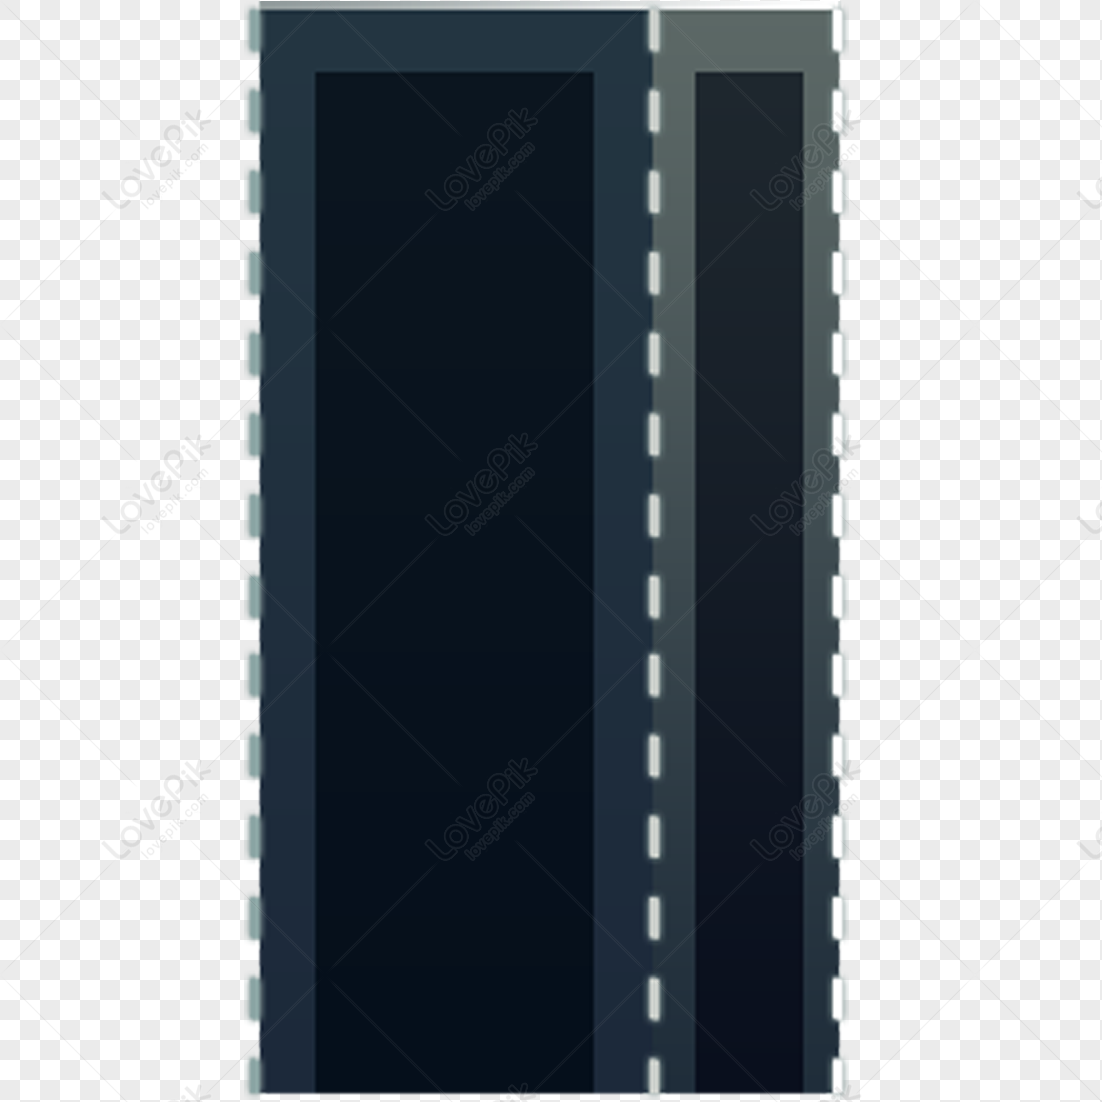 blank building clipart